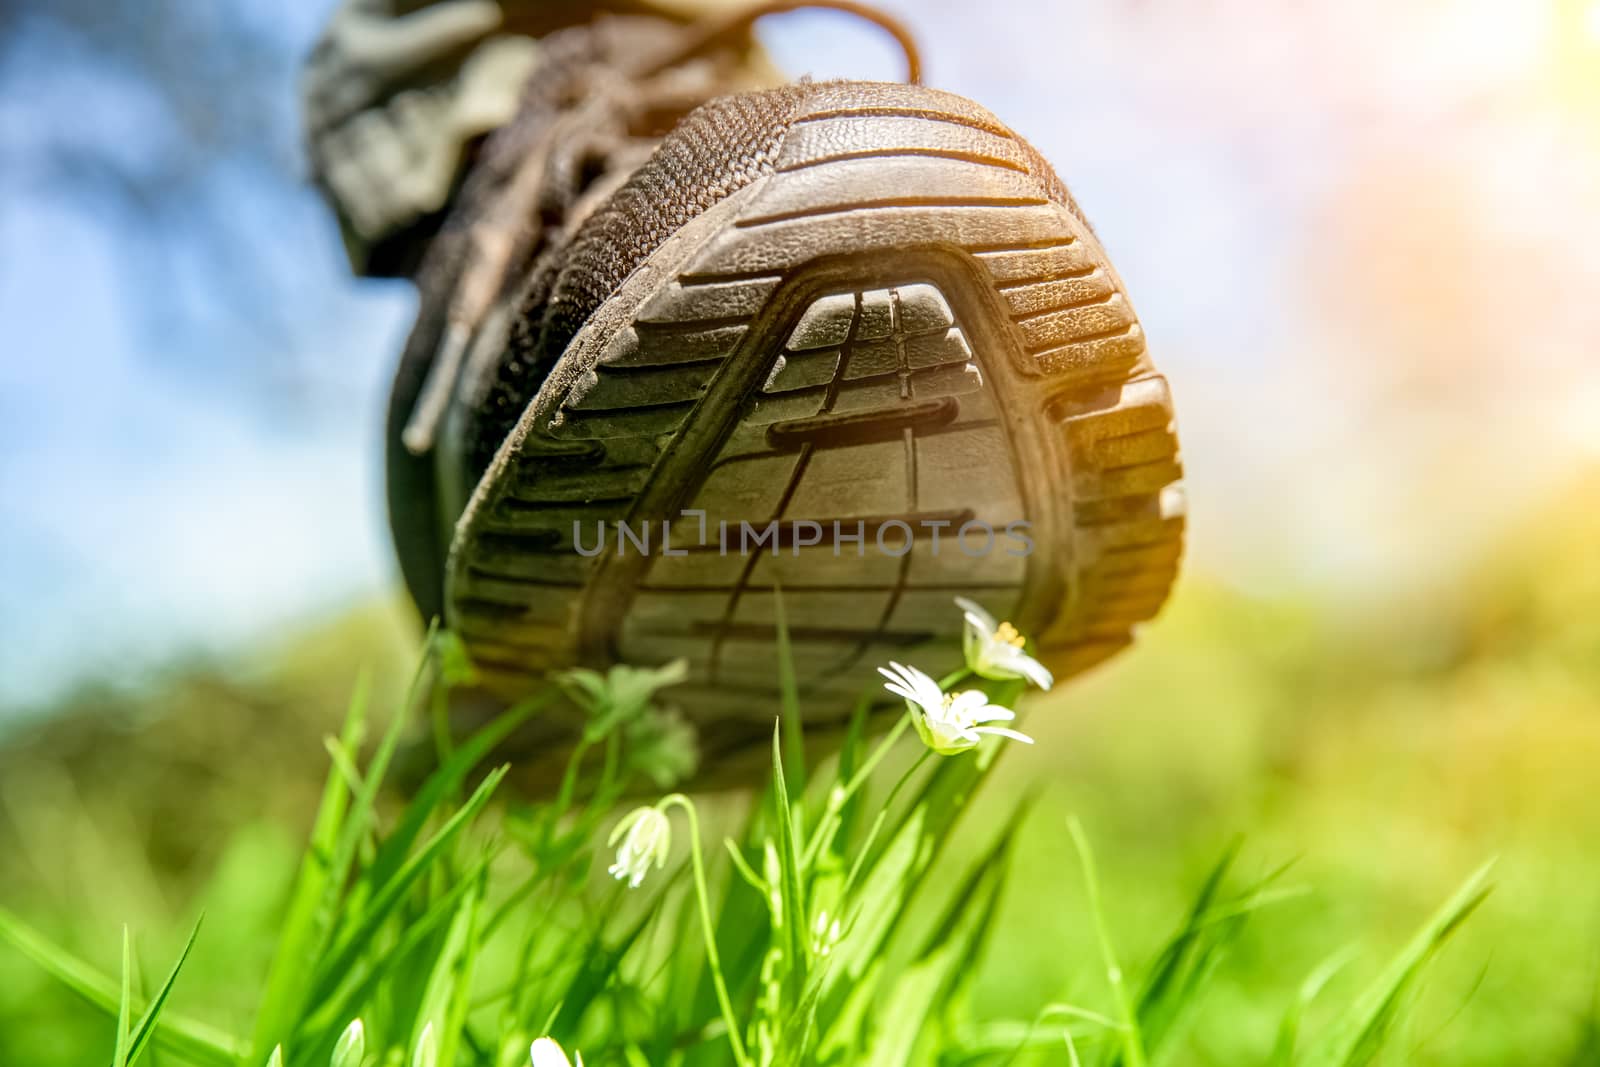 human foot in a shoe tramples white flowers on a green field.